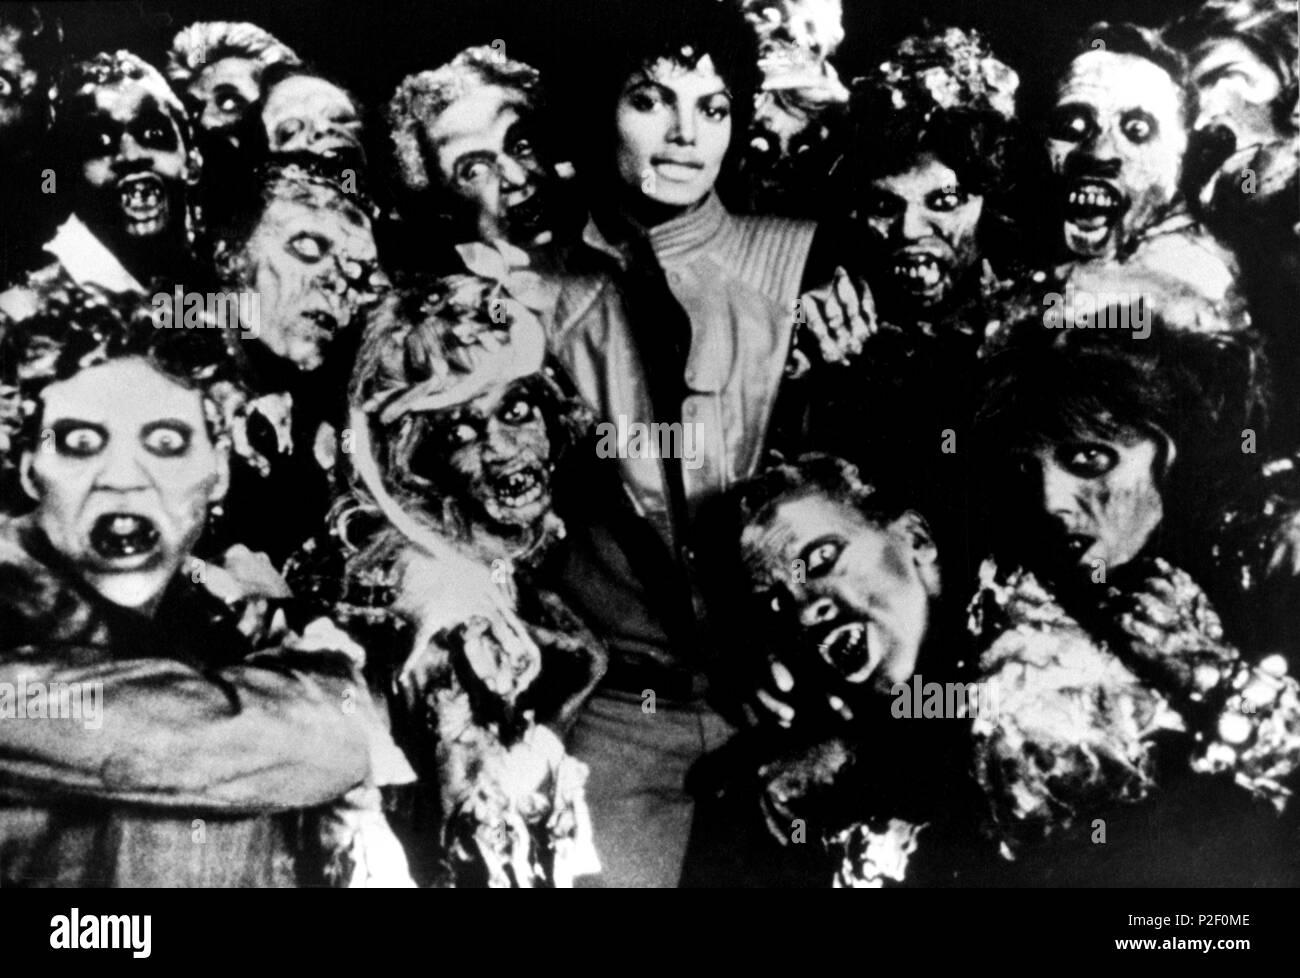 Scene from the video 'Thriller' with Michael Jackson. Stock Photo